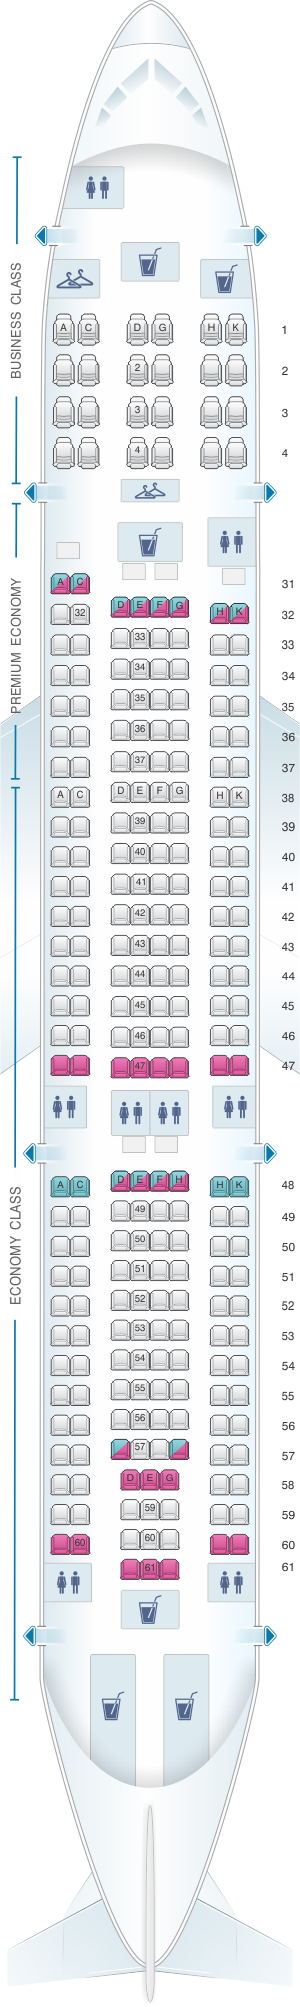 Seat Map China Southern Airlines Airbus A330 200 Layout A Seatmaestro